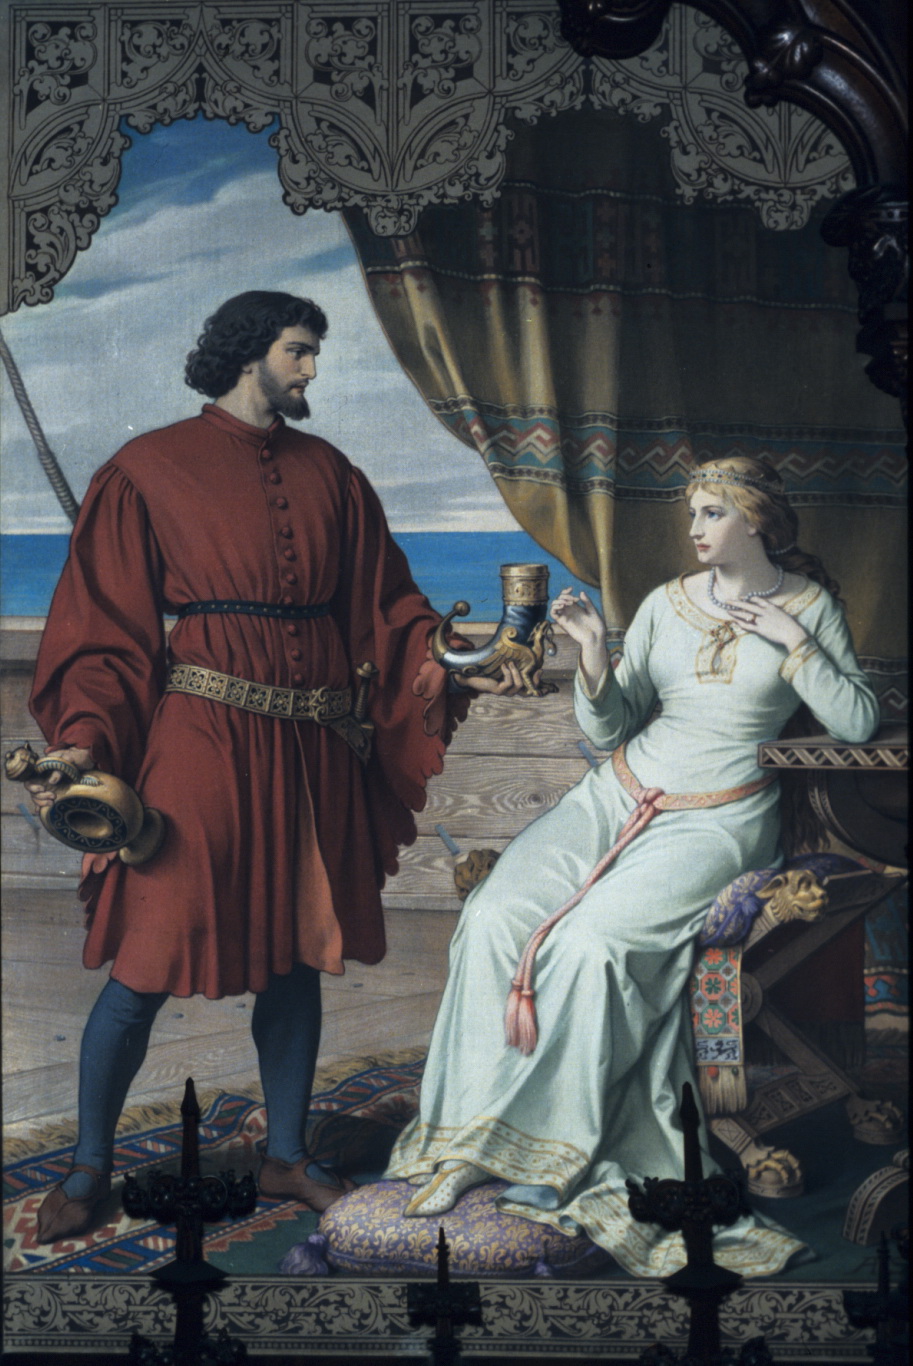 Tristan and Isolde 